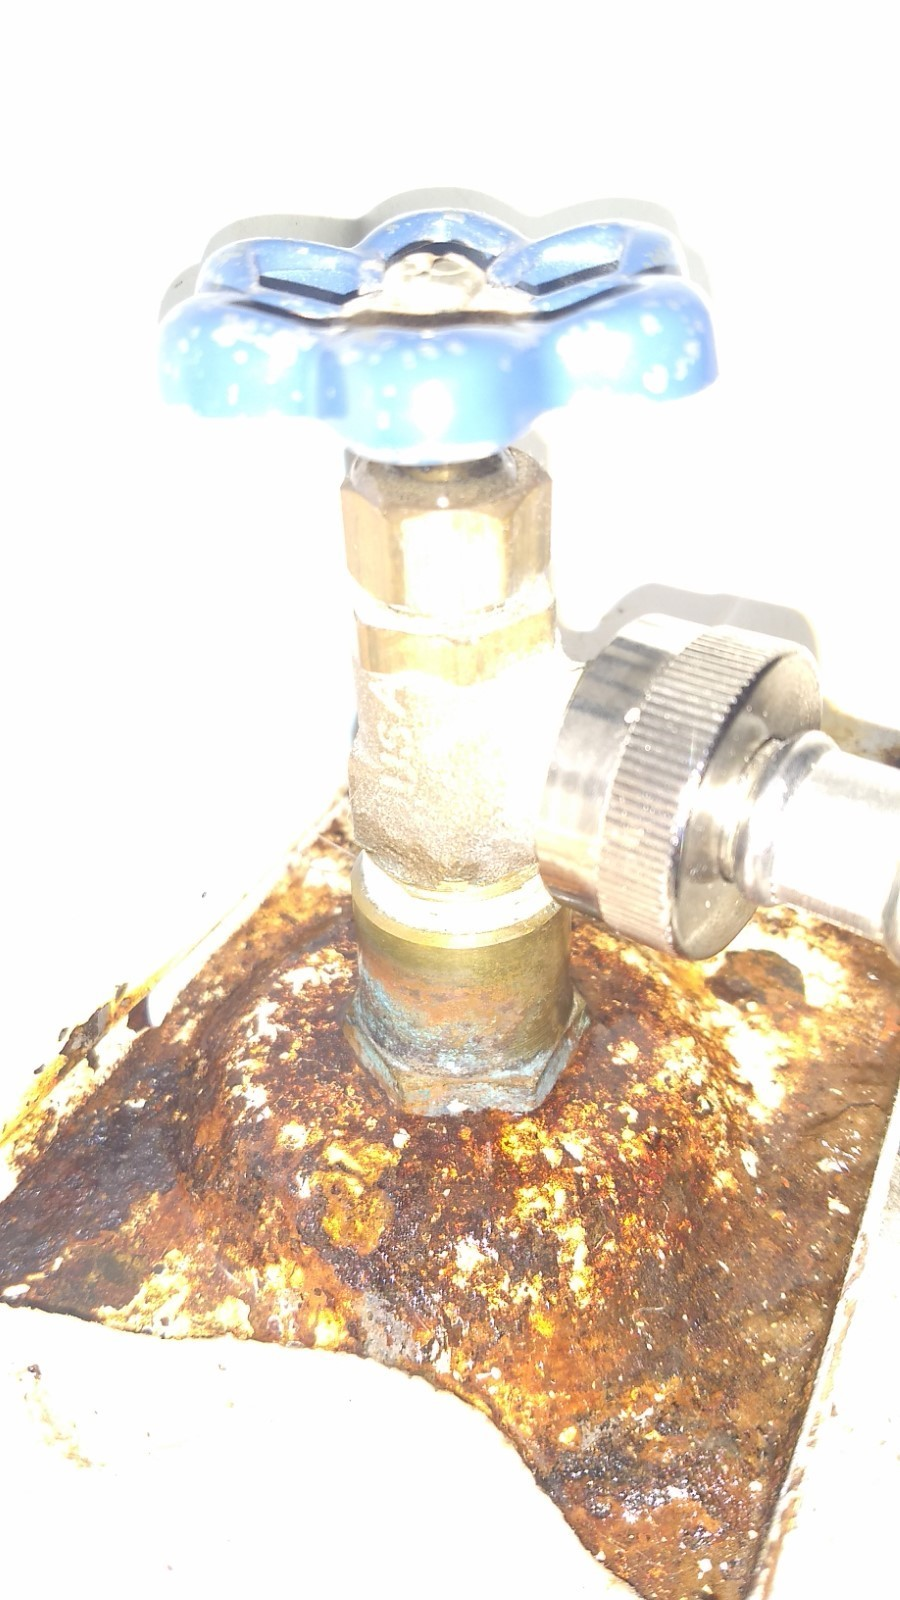 Leaking water from a hot-water shut-off valve connection,